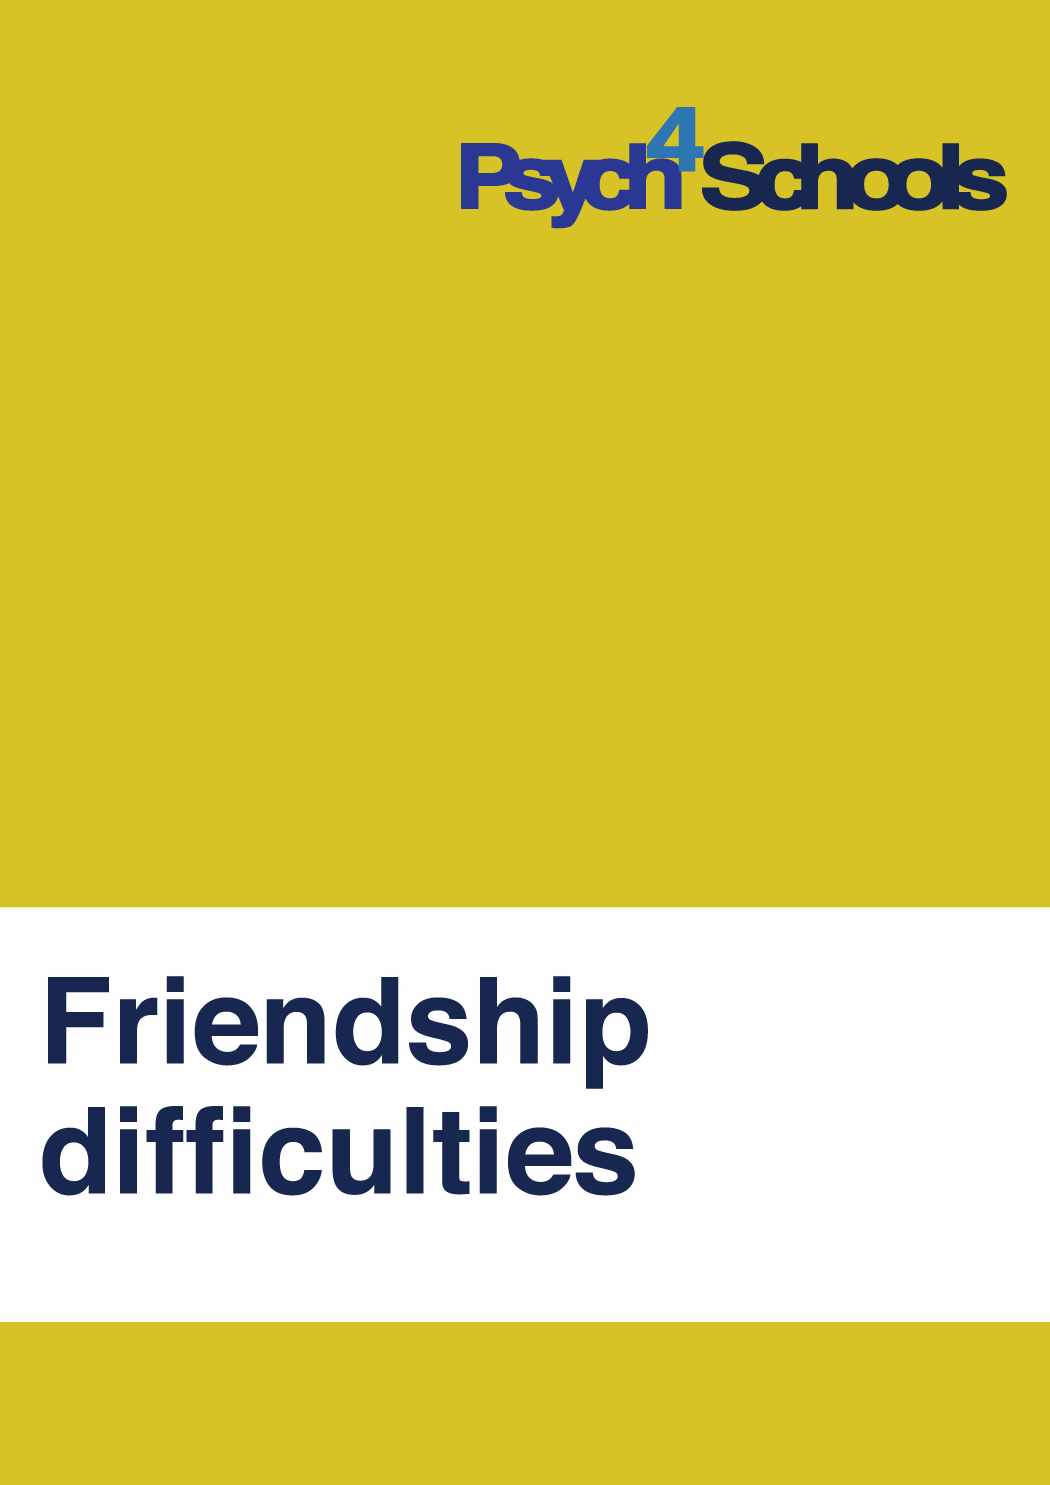 Friendship difficulties